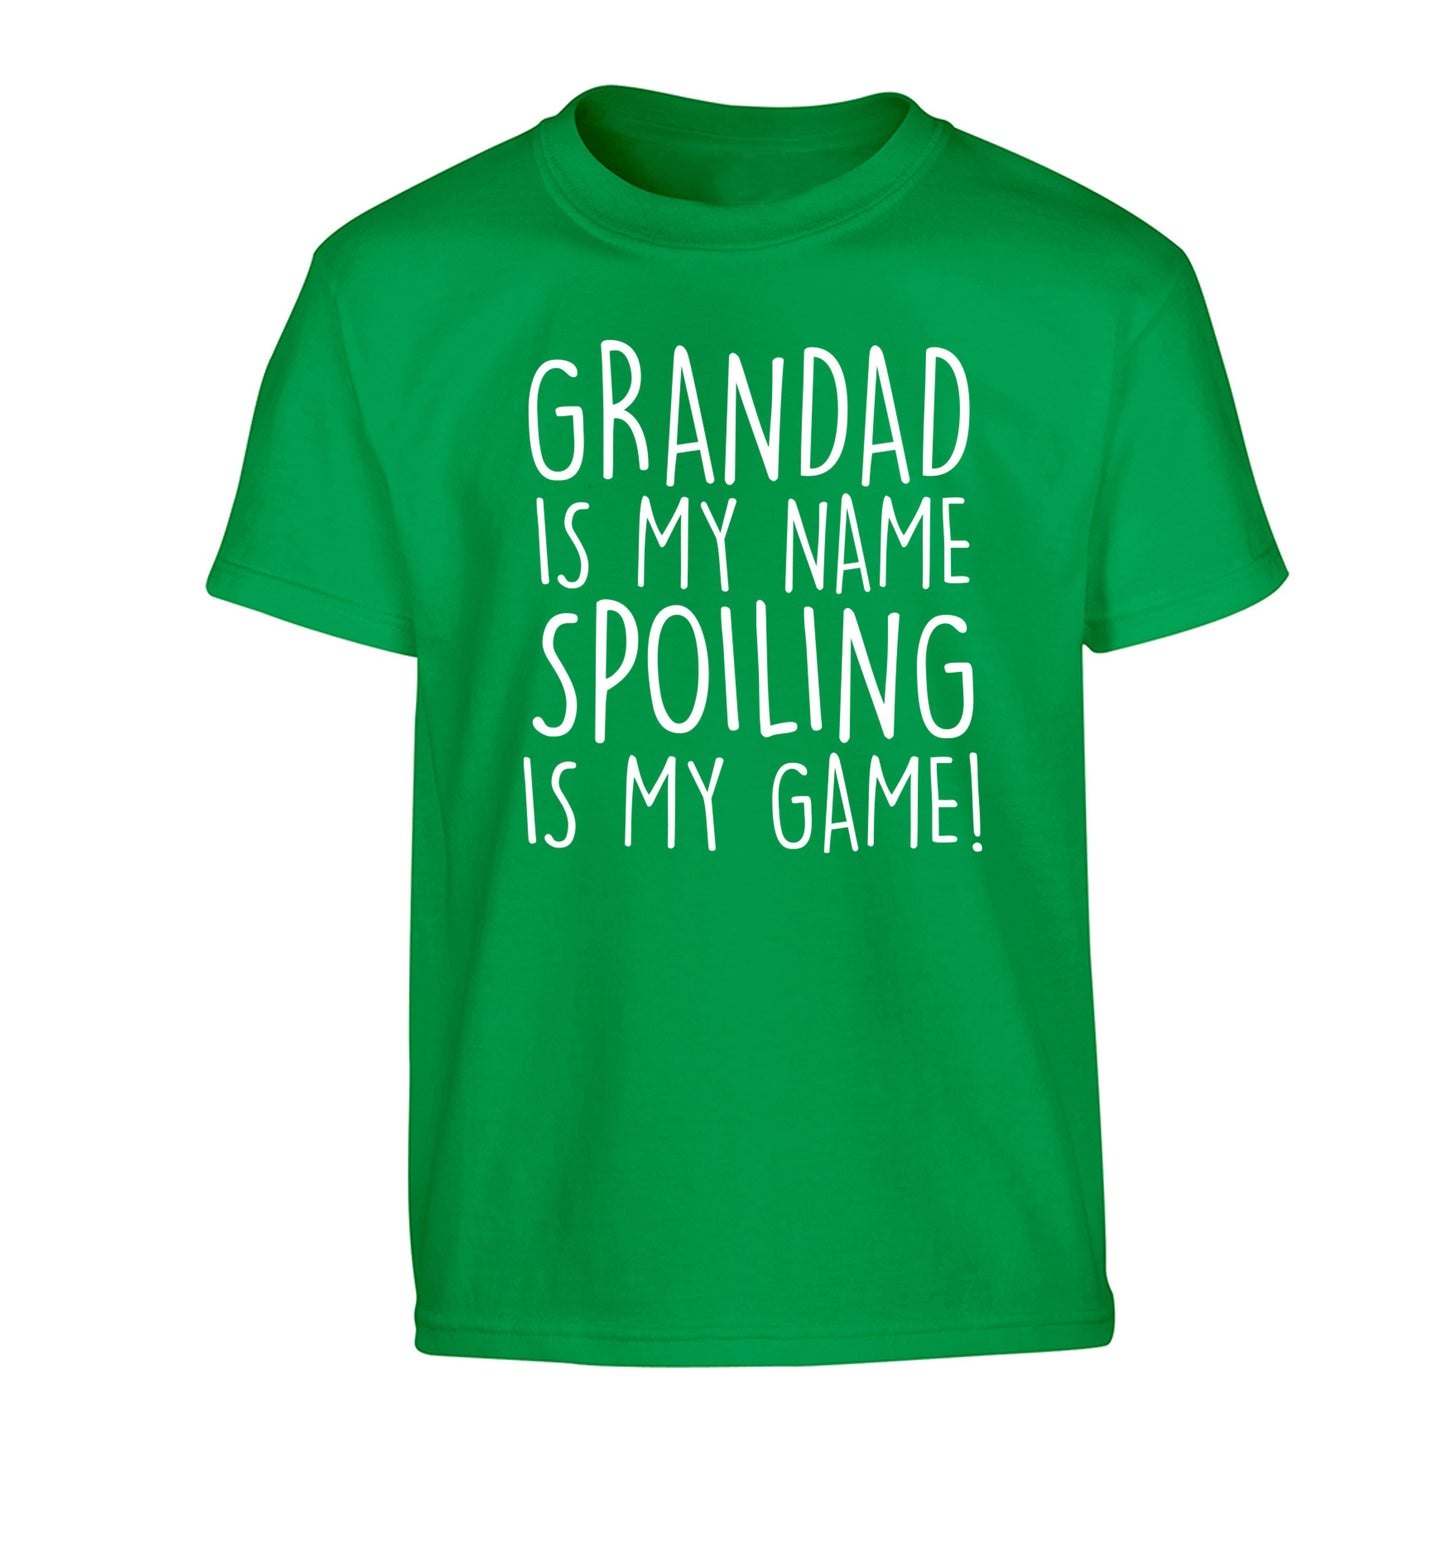 Grandad is my name, spoiling is my game Children's green Tshirt 12-14 Years